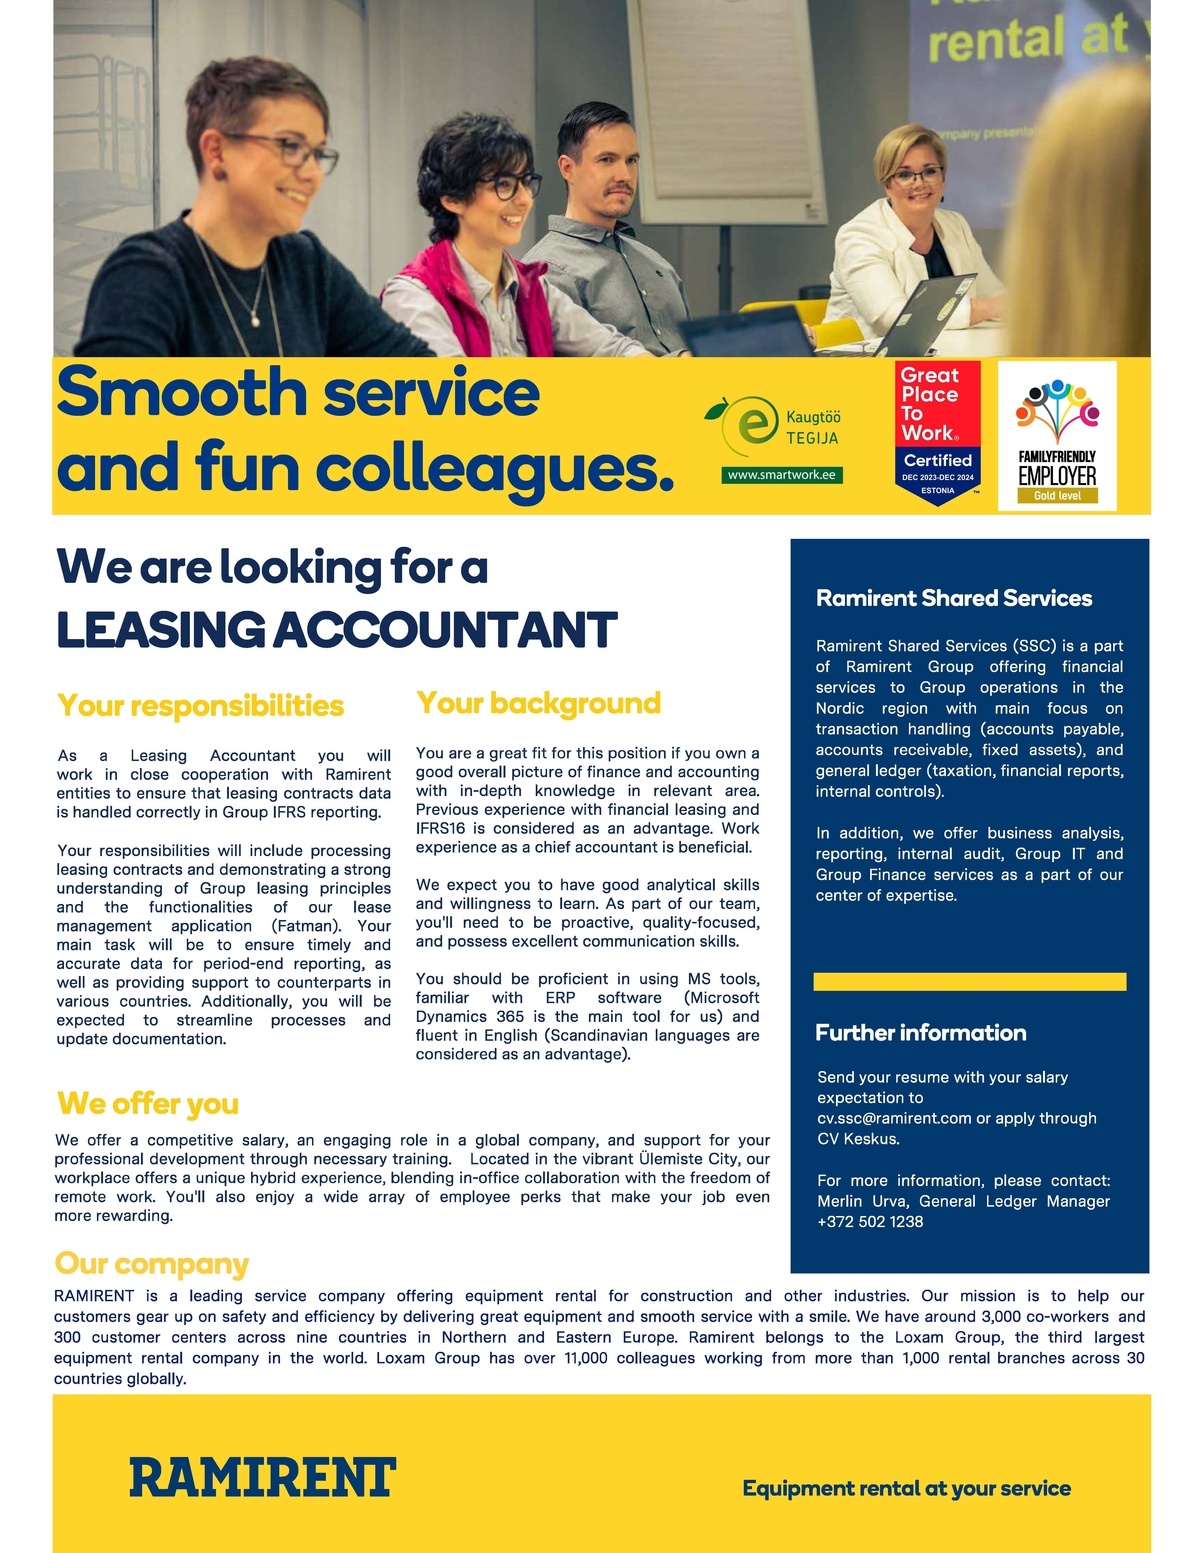 Ramirent Shared Services AS Leasing Accountant